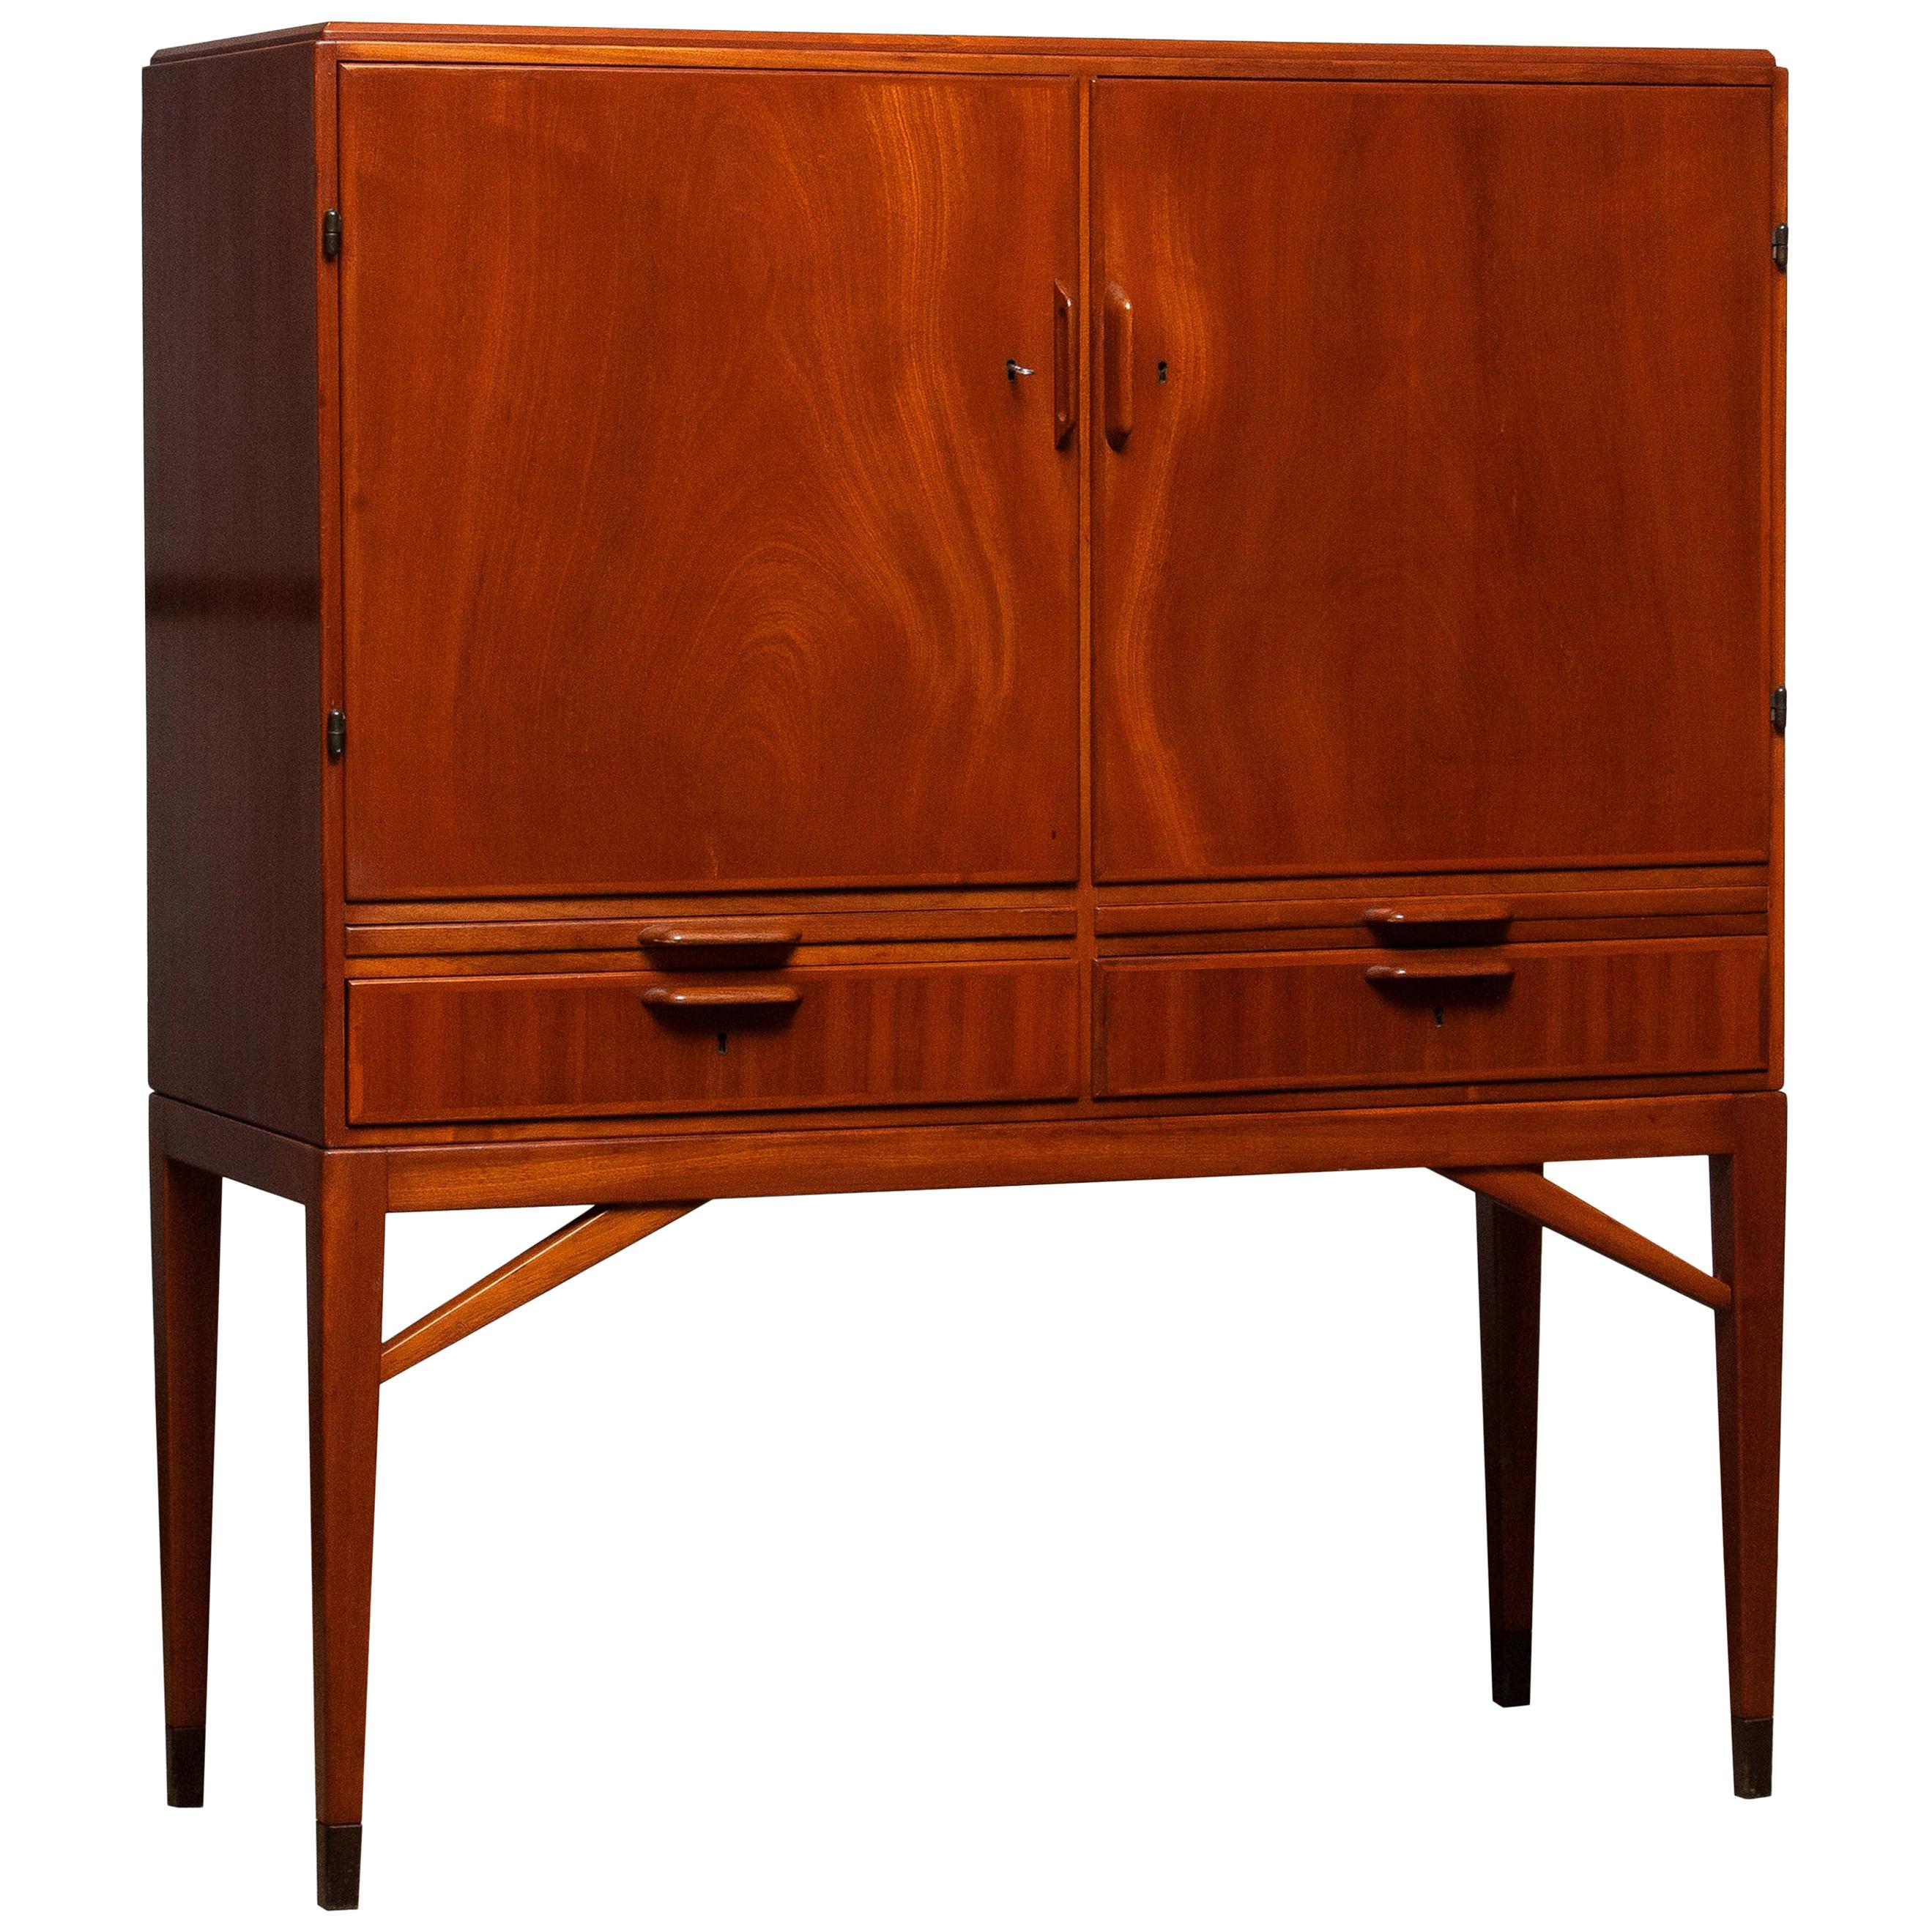 1950s, High Quality Mahogany Dry Bar / Cabinet Made by Marbo Sweden, SMI Labeled